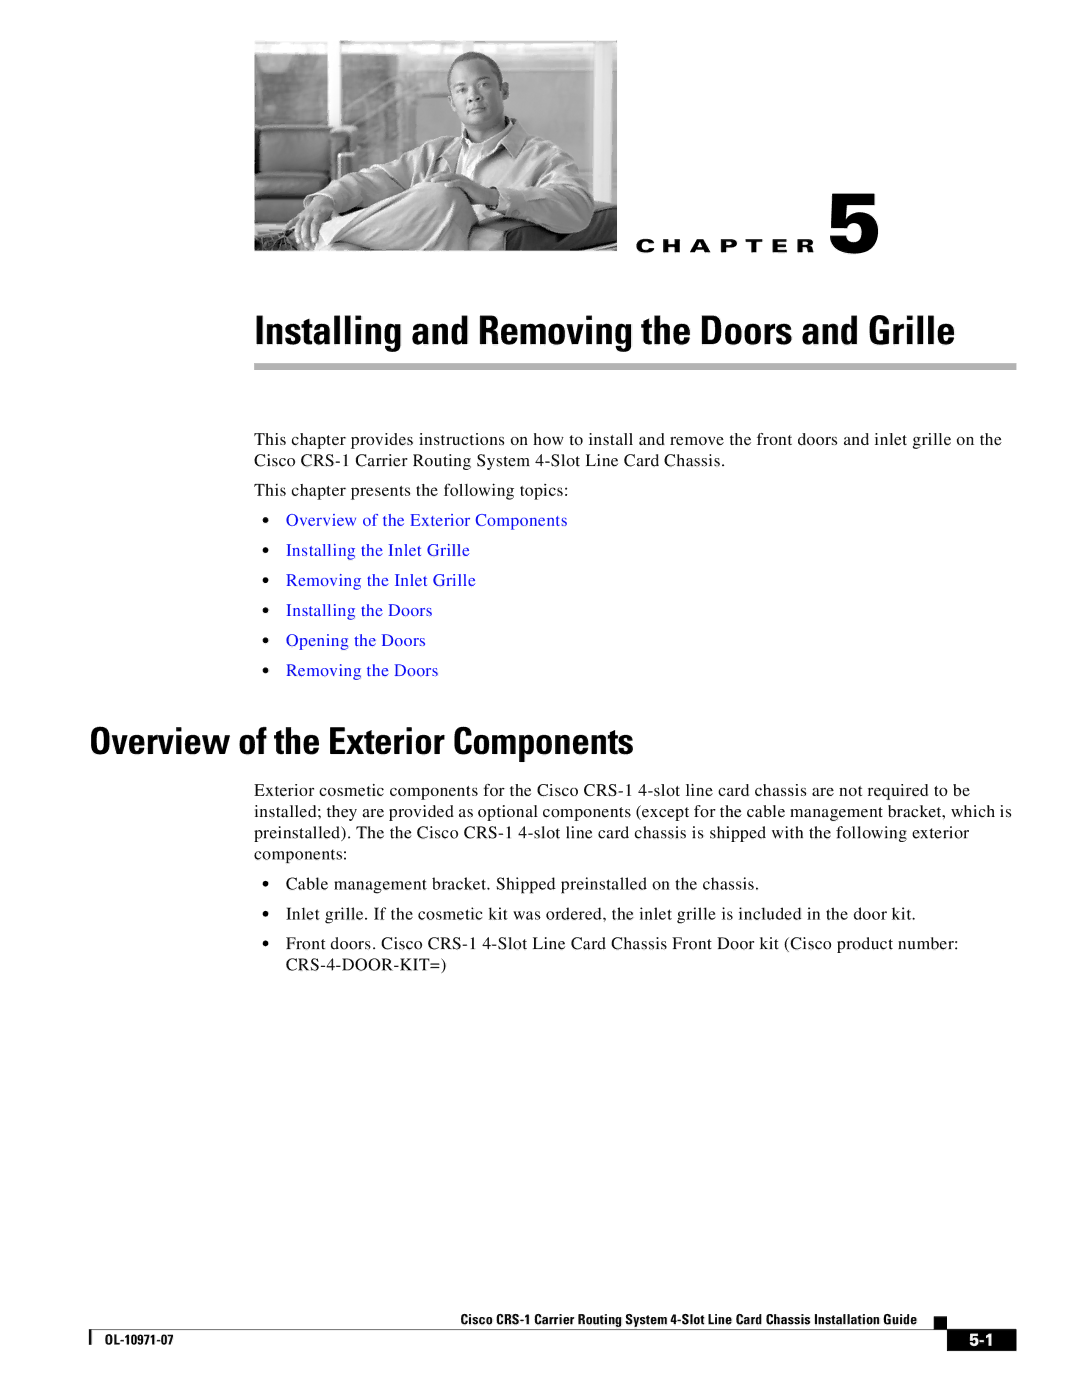 Cisco Systems Cisco CRS-1 manual Installing and Removing the Doors and Grille, Overview of the Exterior Components 